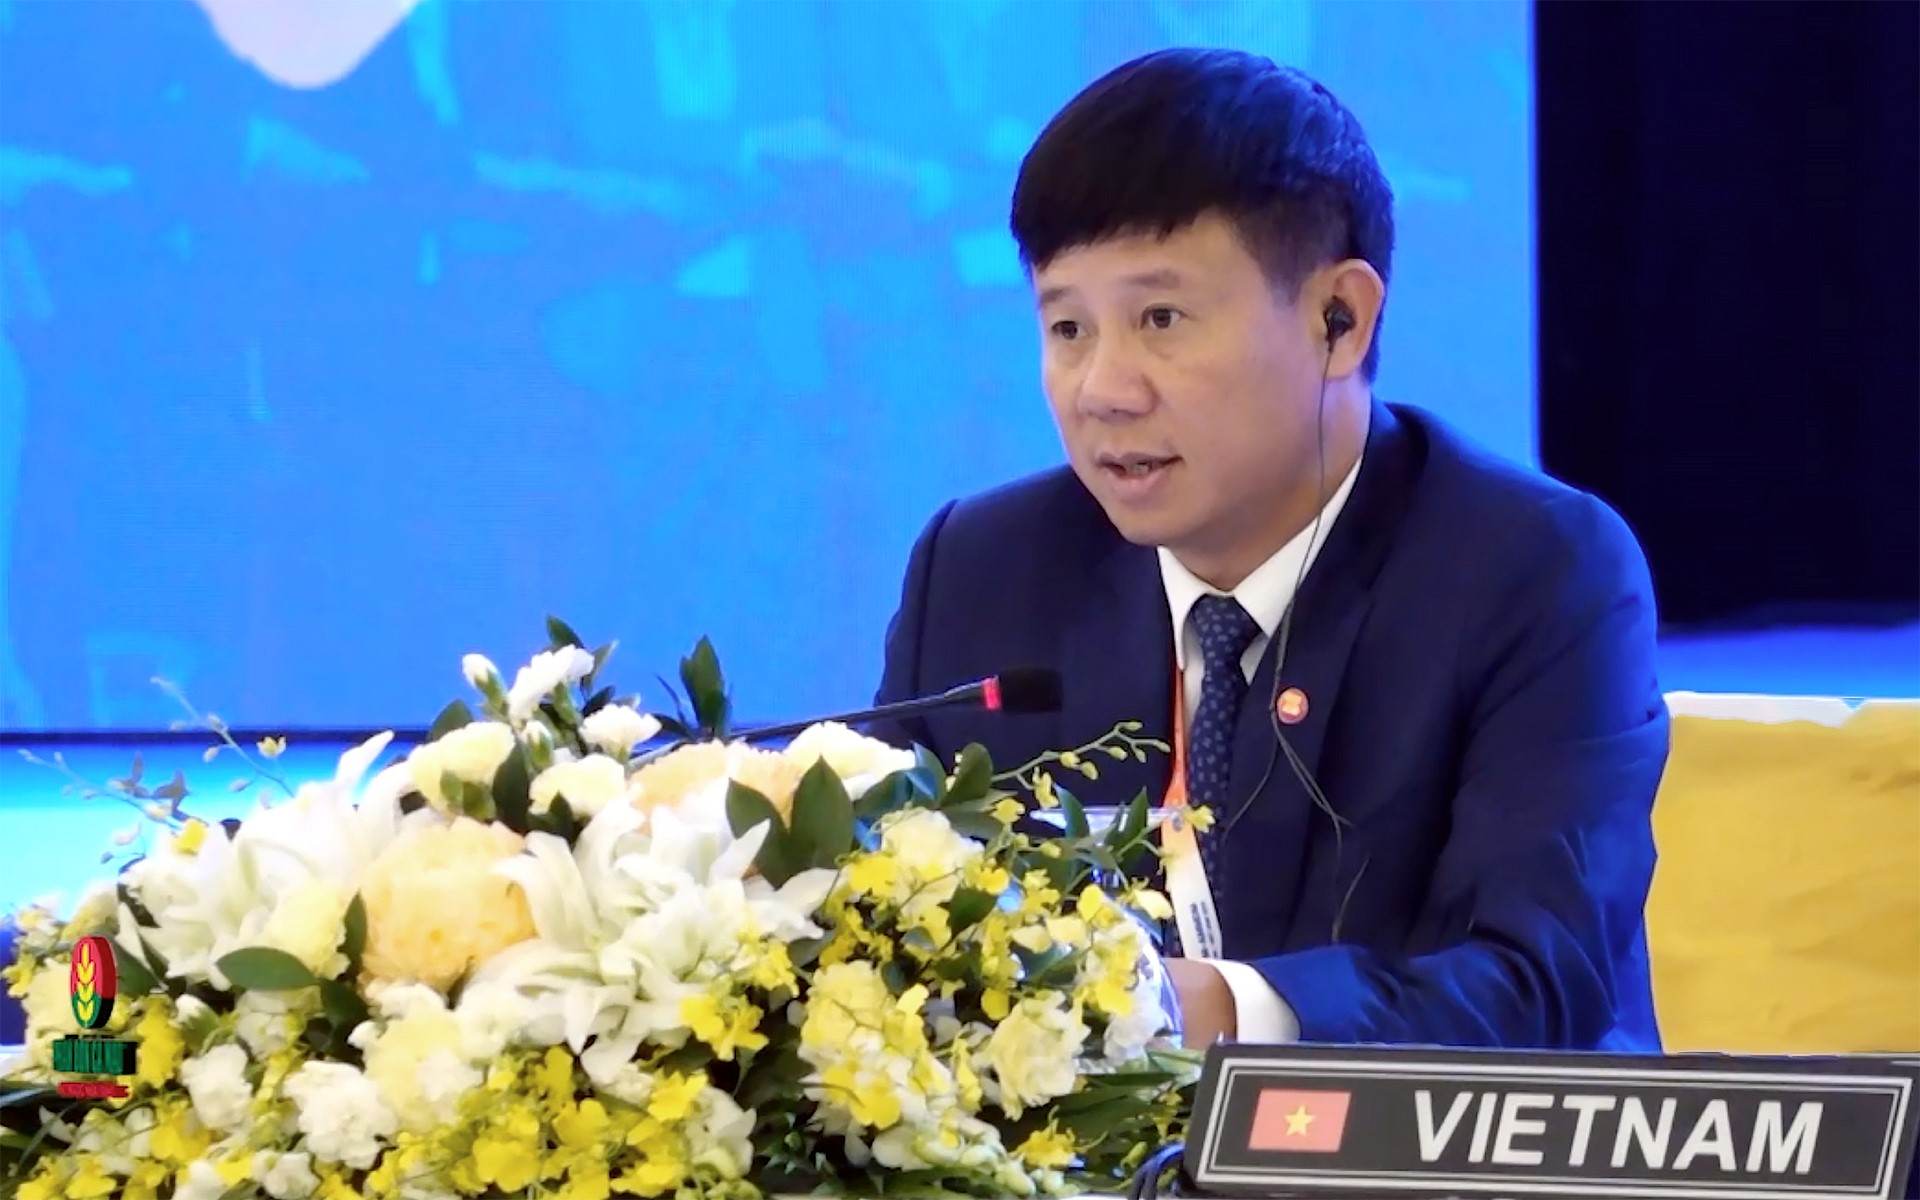 Director Pham Duc Luan chaired in turn meetings between the ASEAN Committee on Disaster Management (ACDM) and Japan, China, and South Korea partners. Photo: Quang Dung.